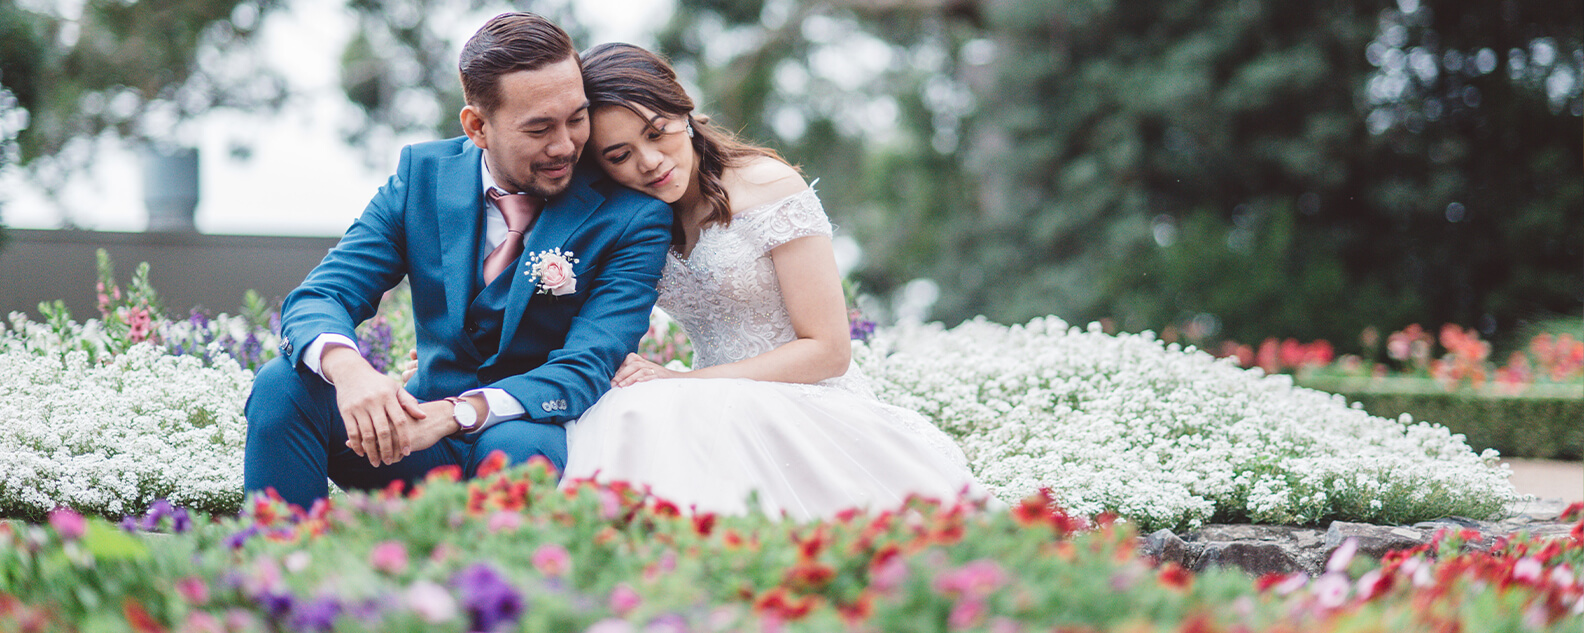 Bride and groom cuddle among bright spring flowers